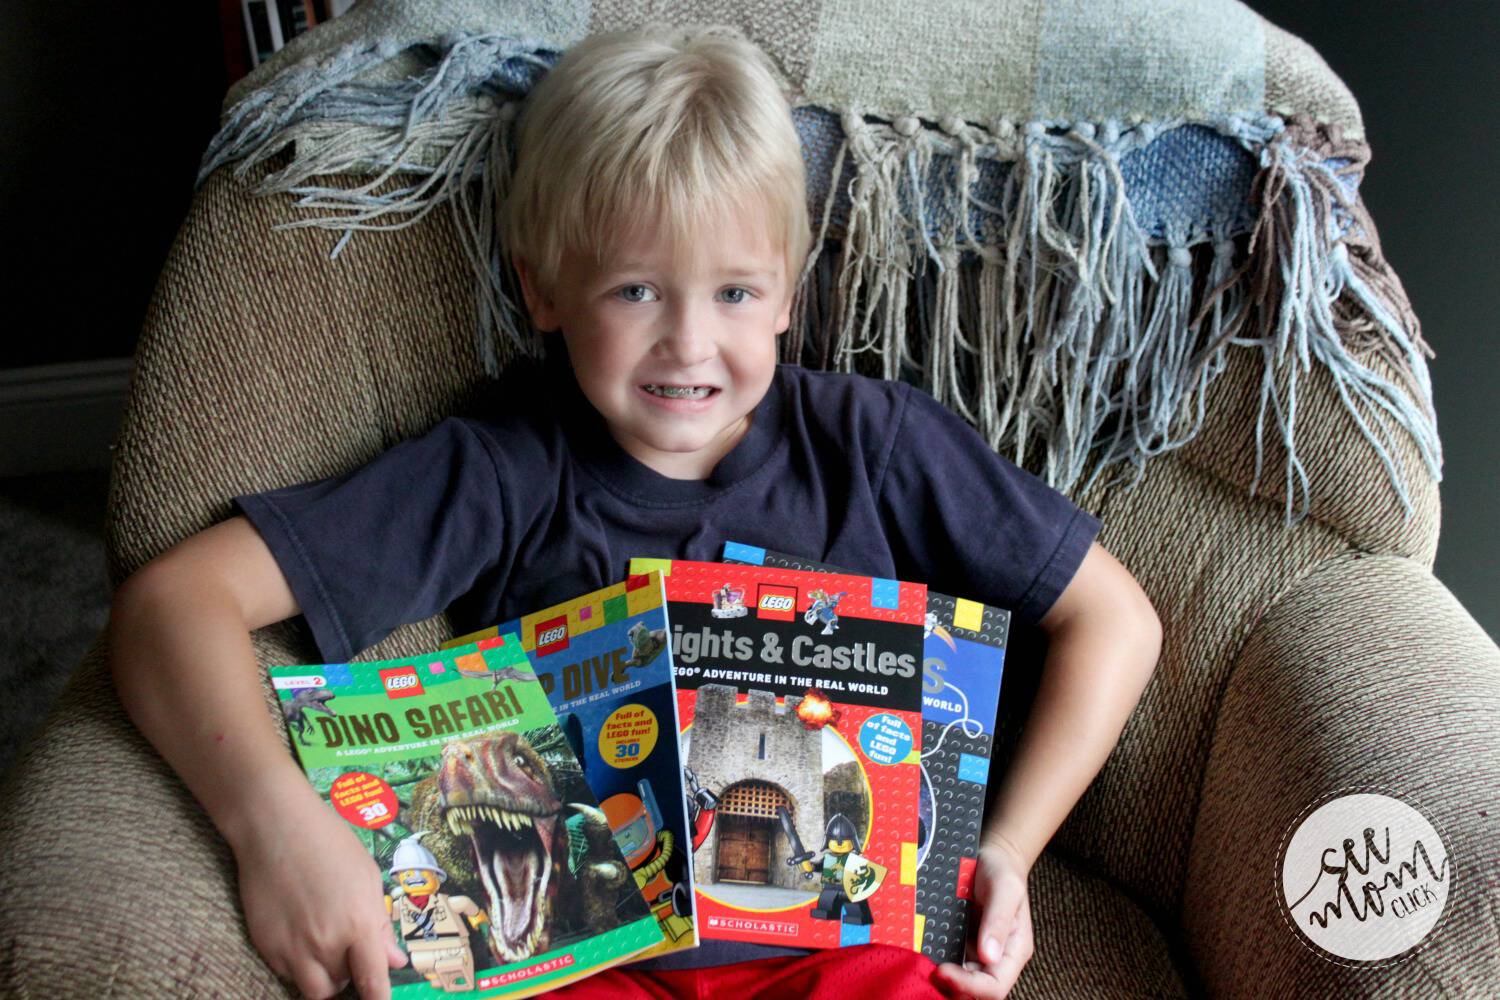 If your kids love LEGO® they'll love this brand new LEGO Nonfiction Book Series! There are 4 books in the batch and my son is eating them up!